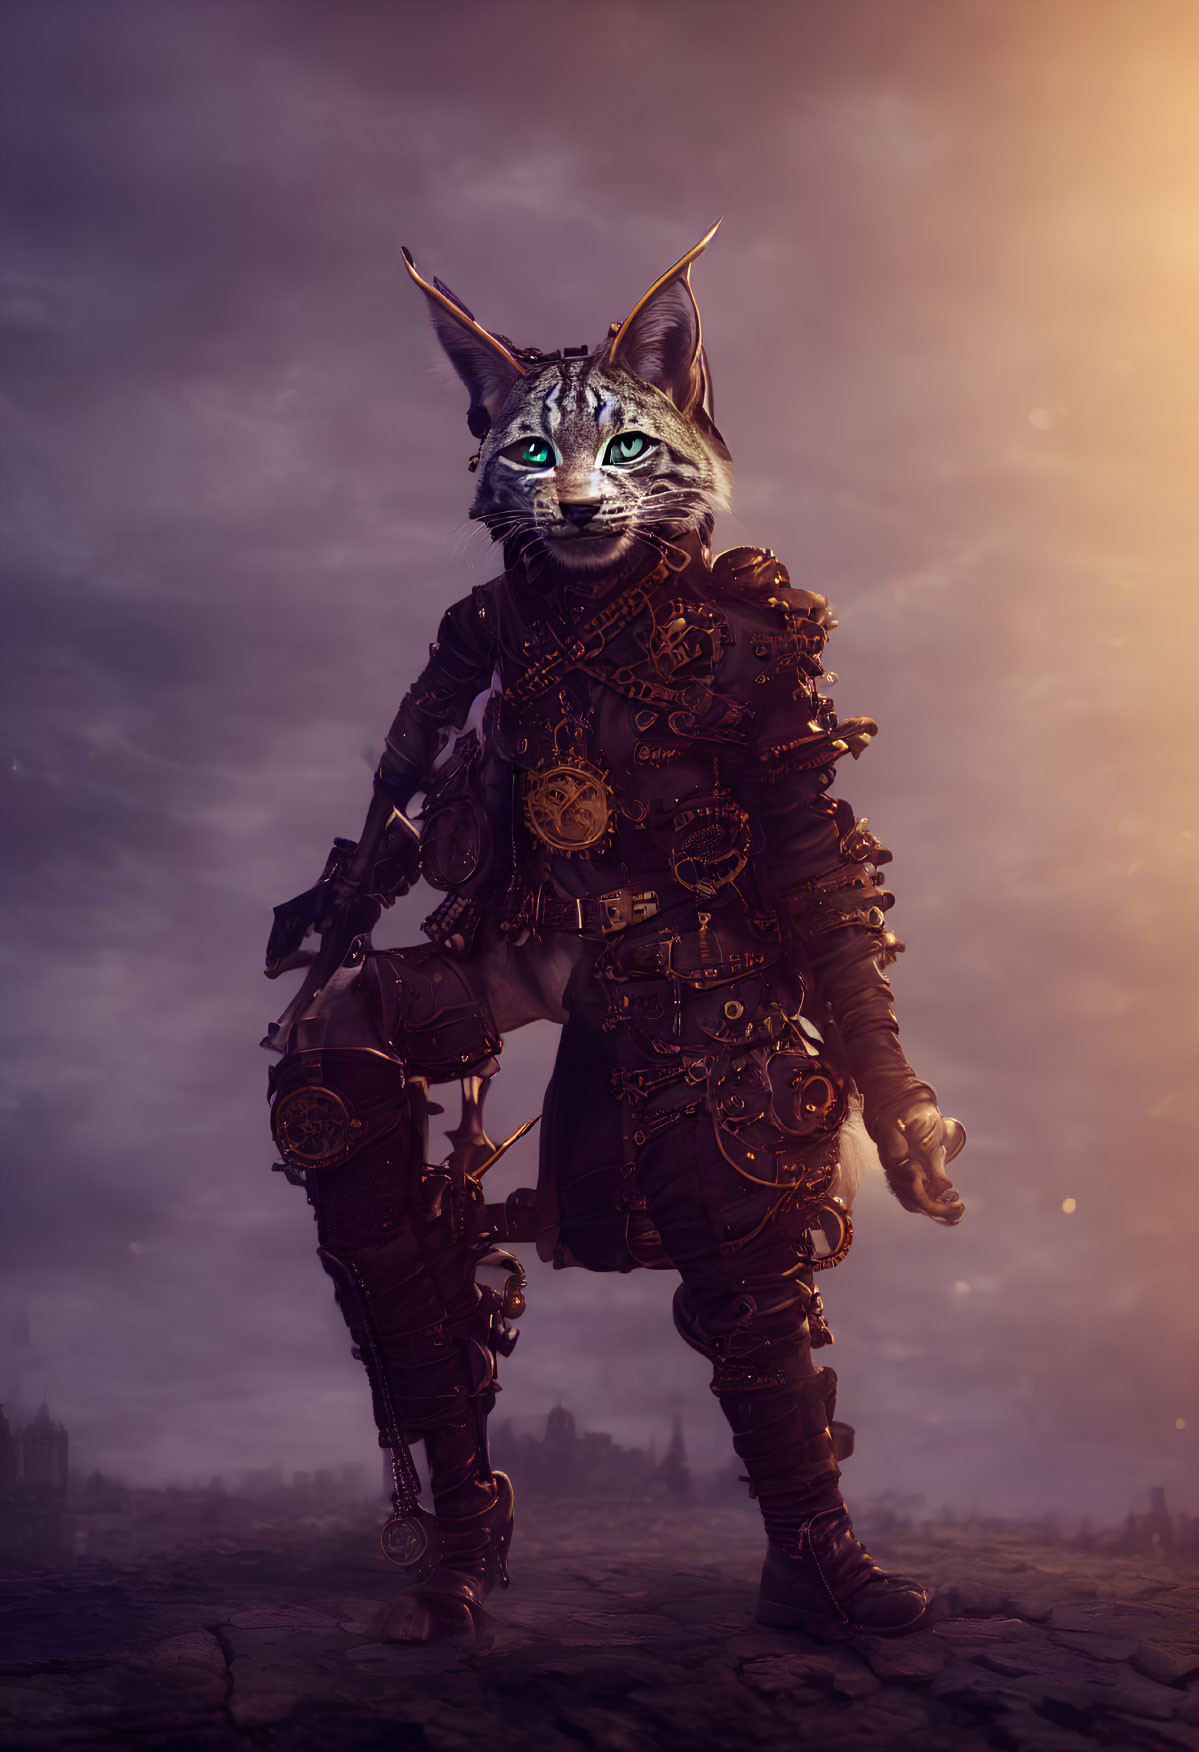 Steampunk-themed anthropomorphic cat with cogs and gears in dusky sky.